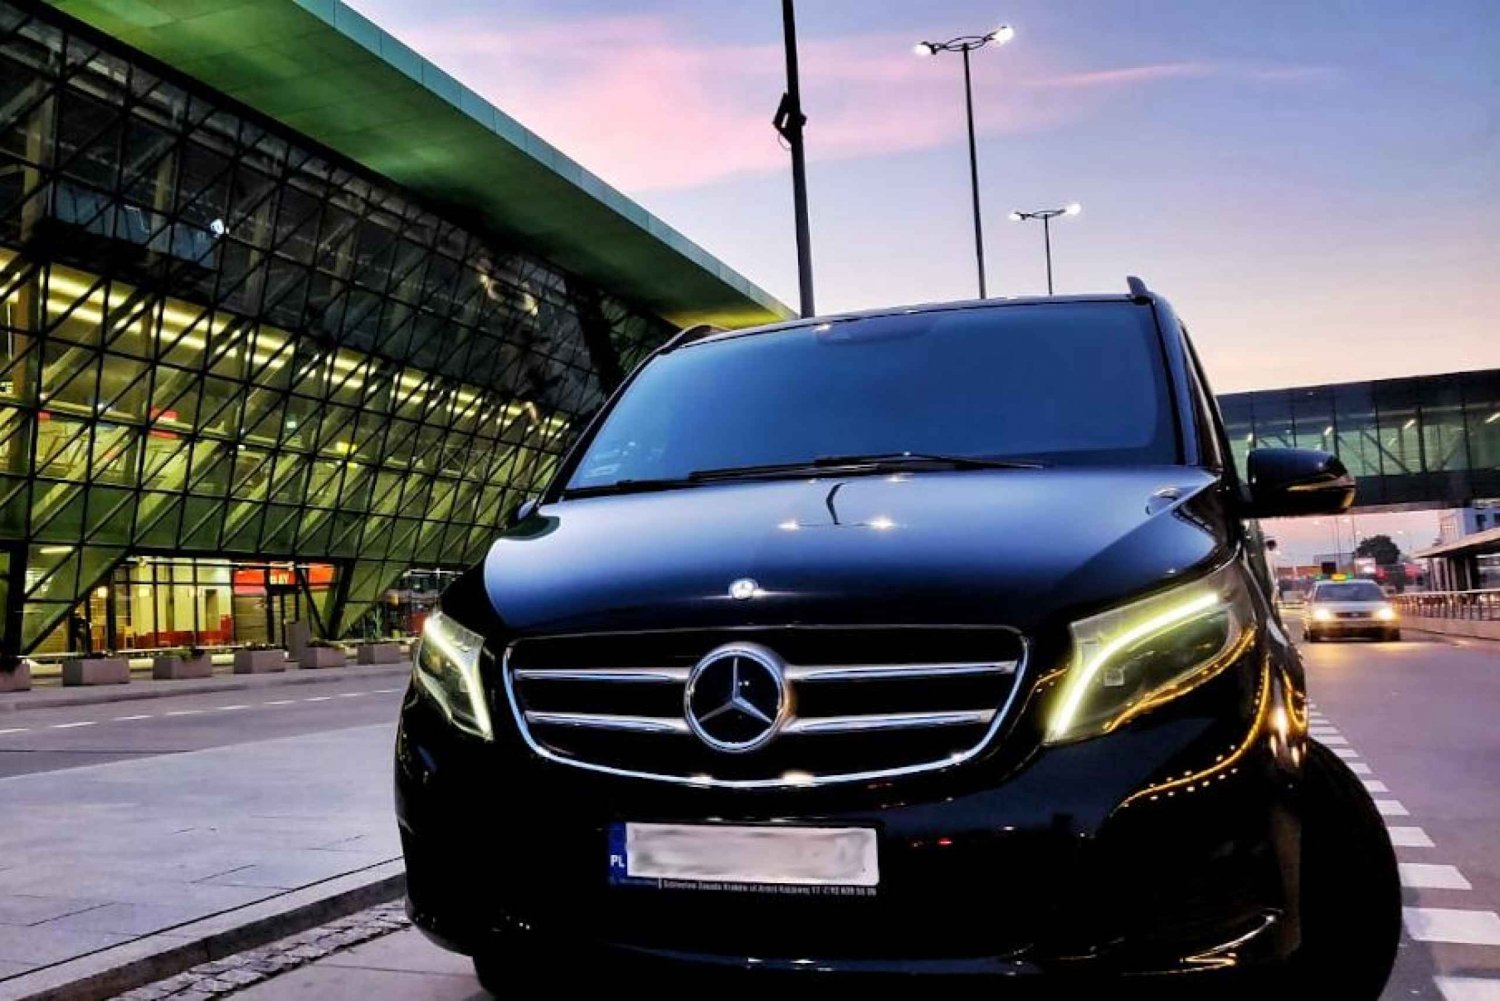 Kraków: Private Transfer to/from Krakow Airport